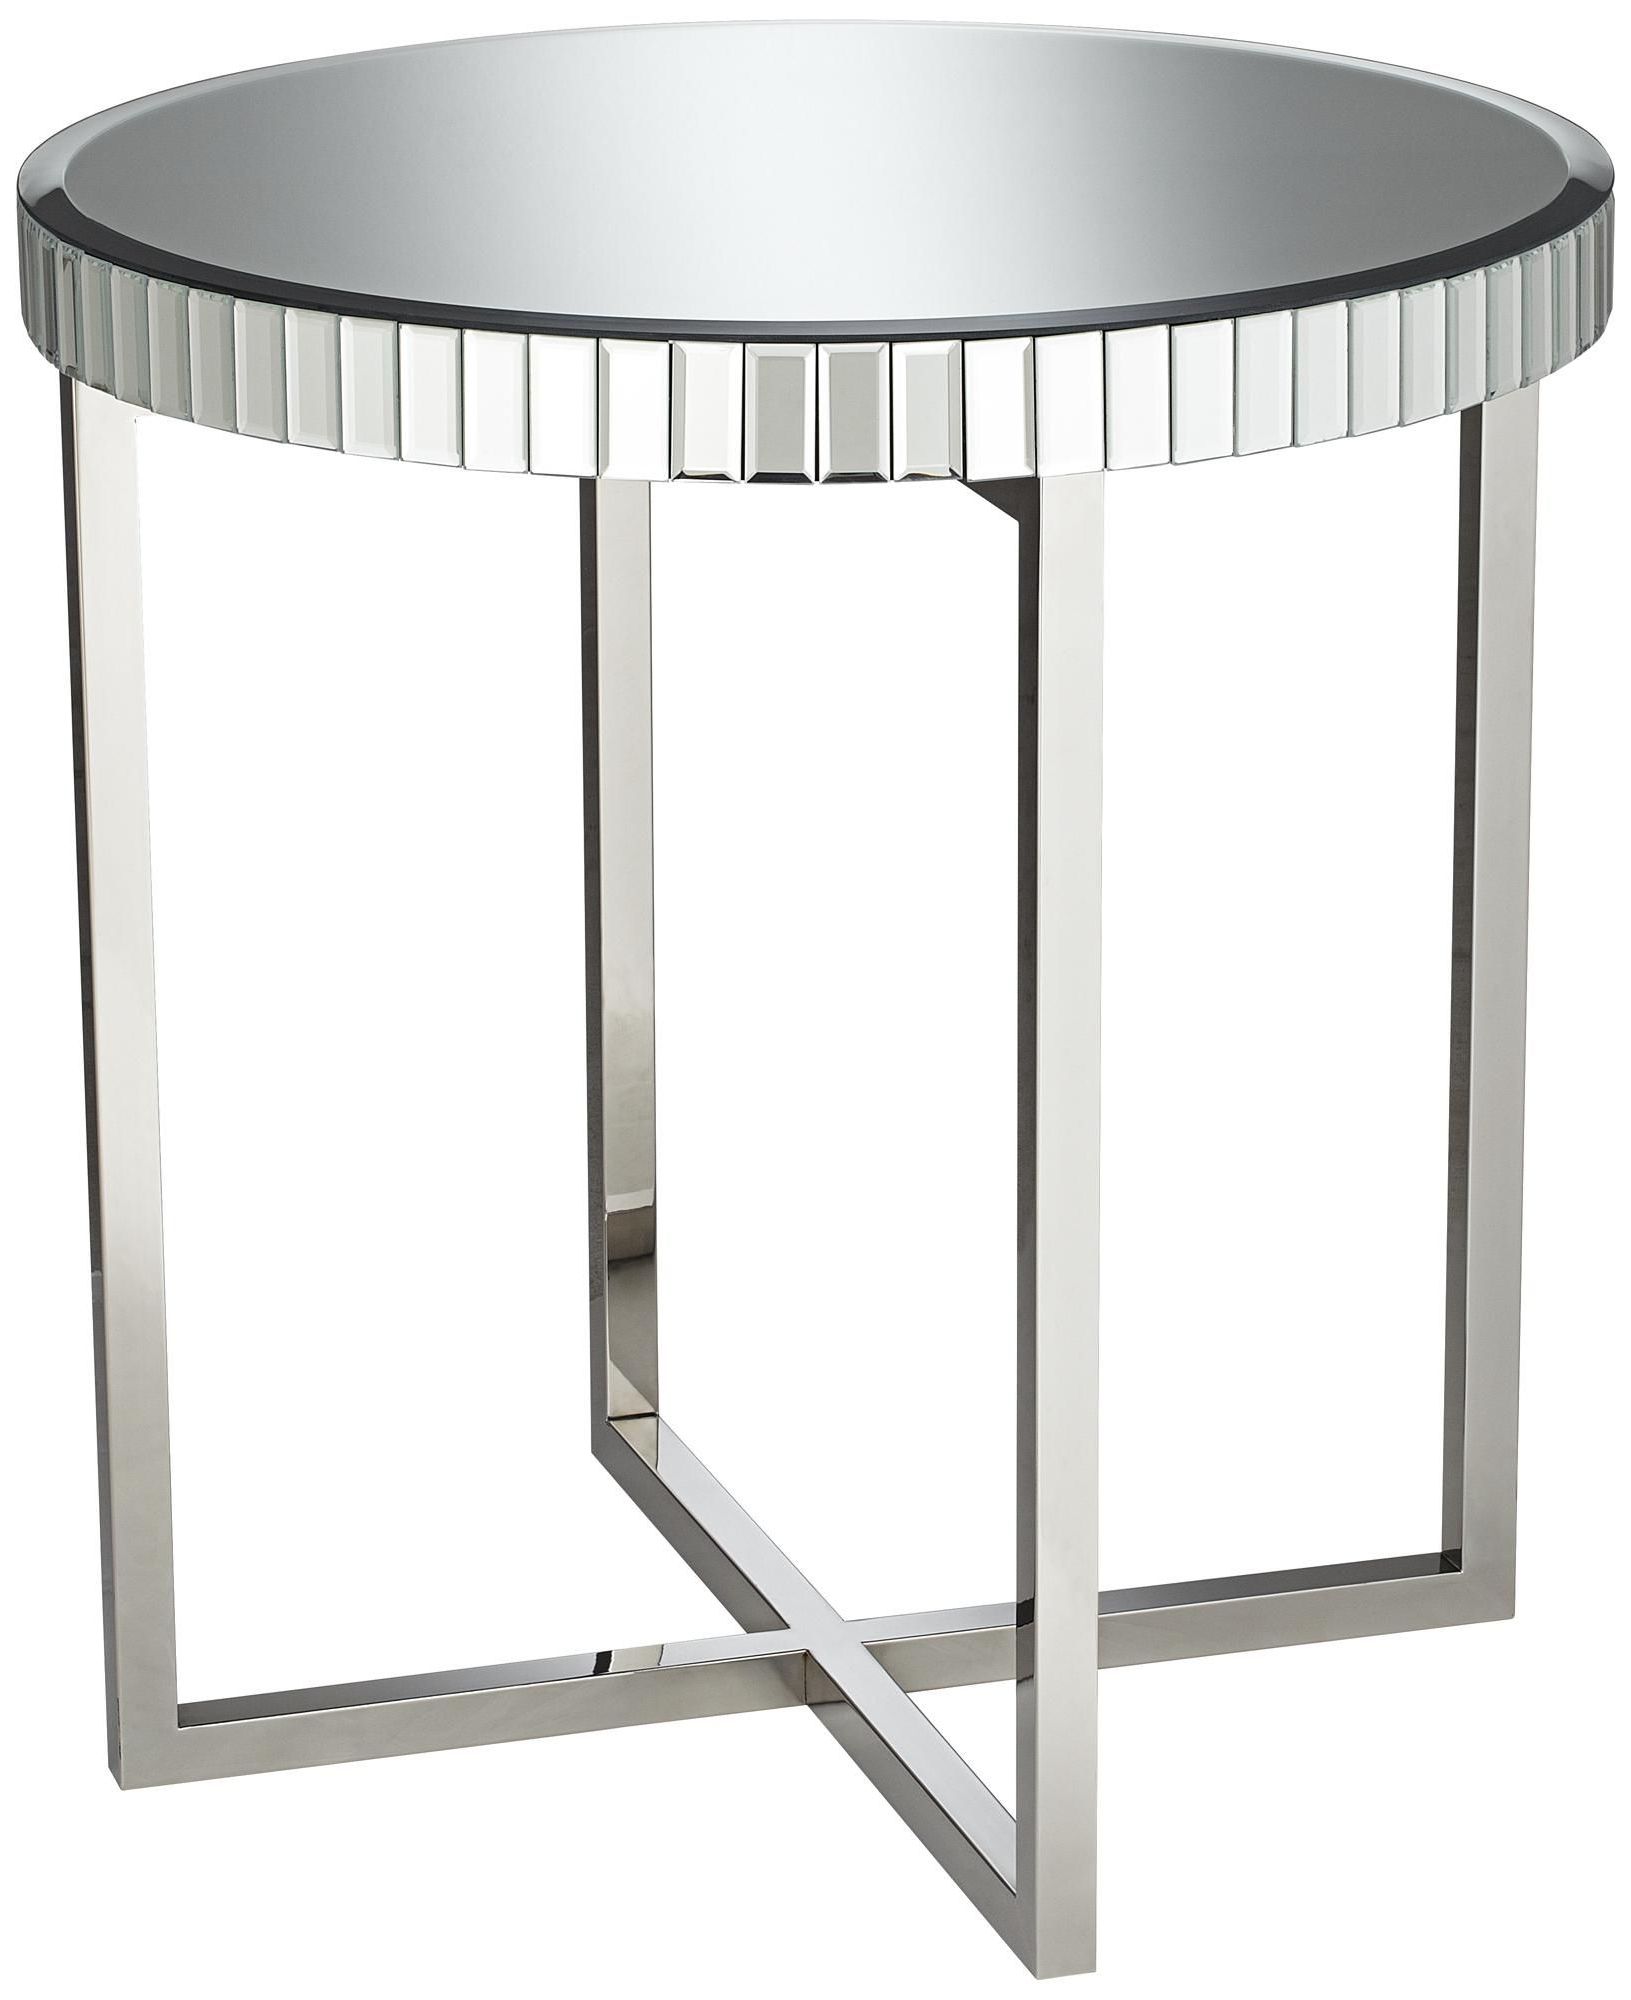 Lamps Plus Throughout Recent Gold And Mirror Modern Cube End Tables (View 5 of 20)